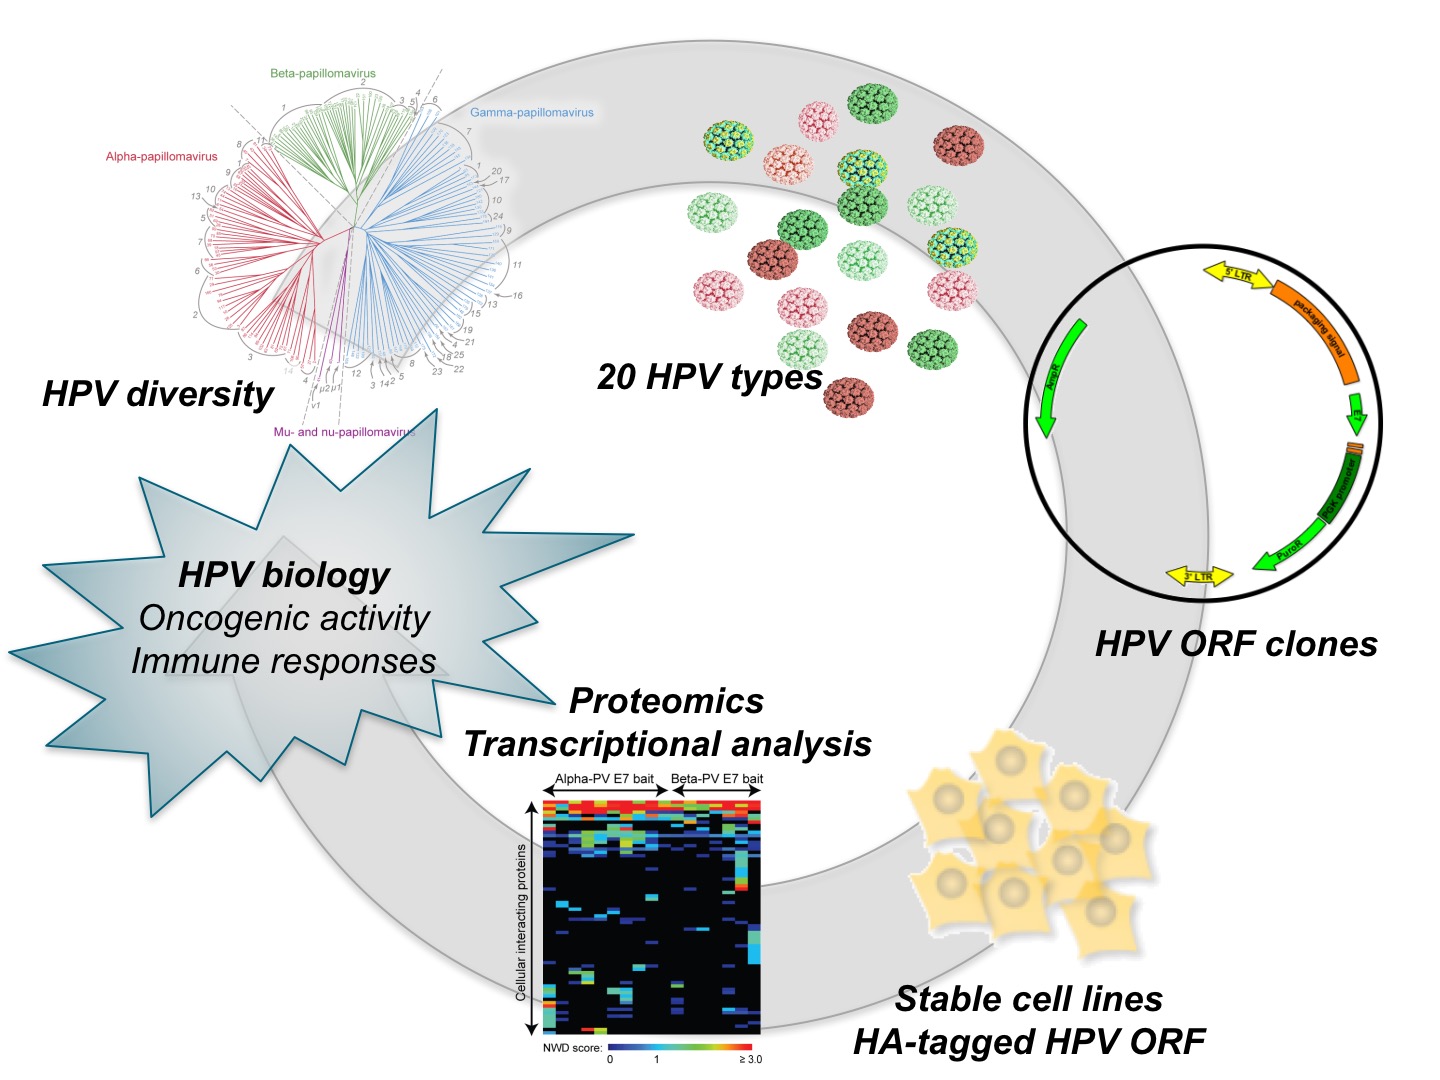 A systematic approach to HPV-host interactions